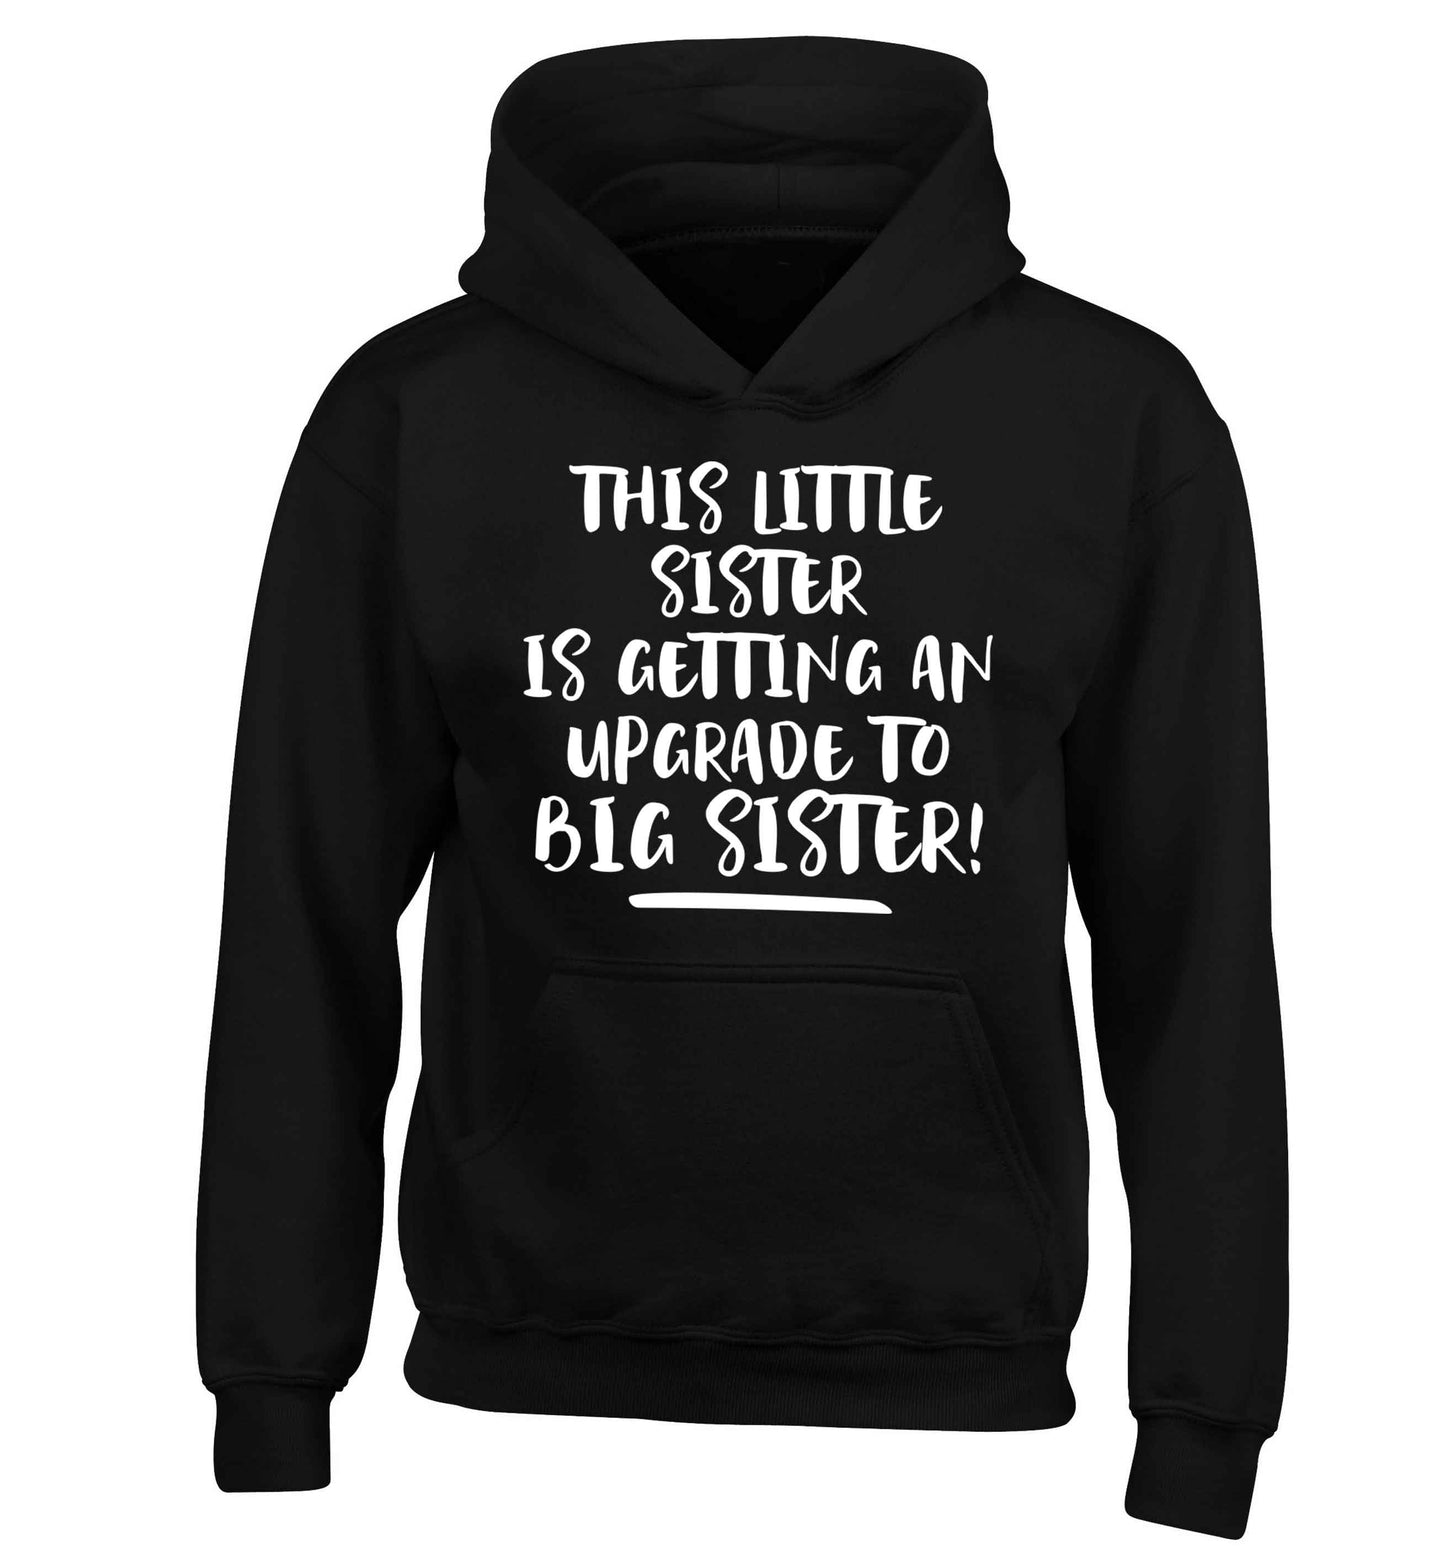 This little sister is getting an upgrade to big sister! children's black hoodie 12-13 Years